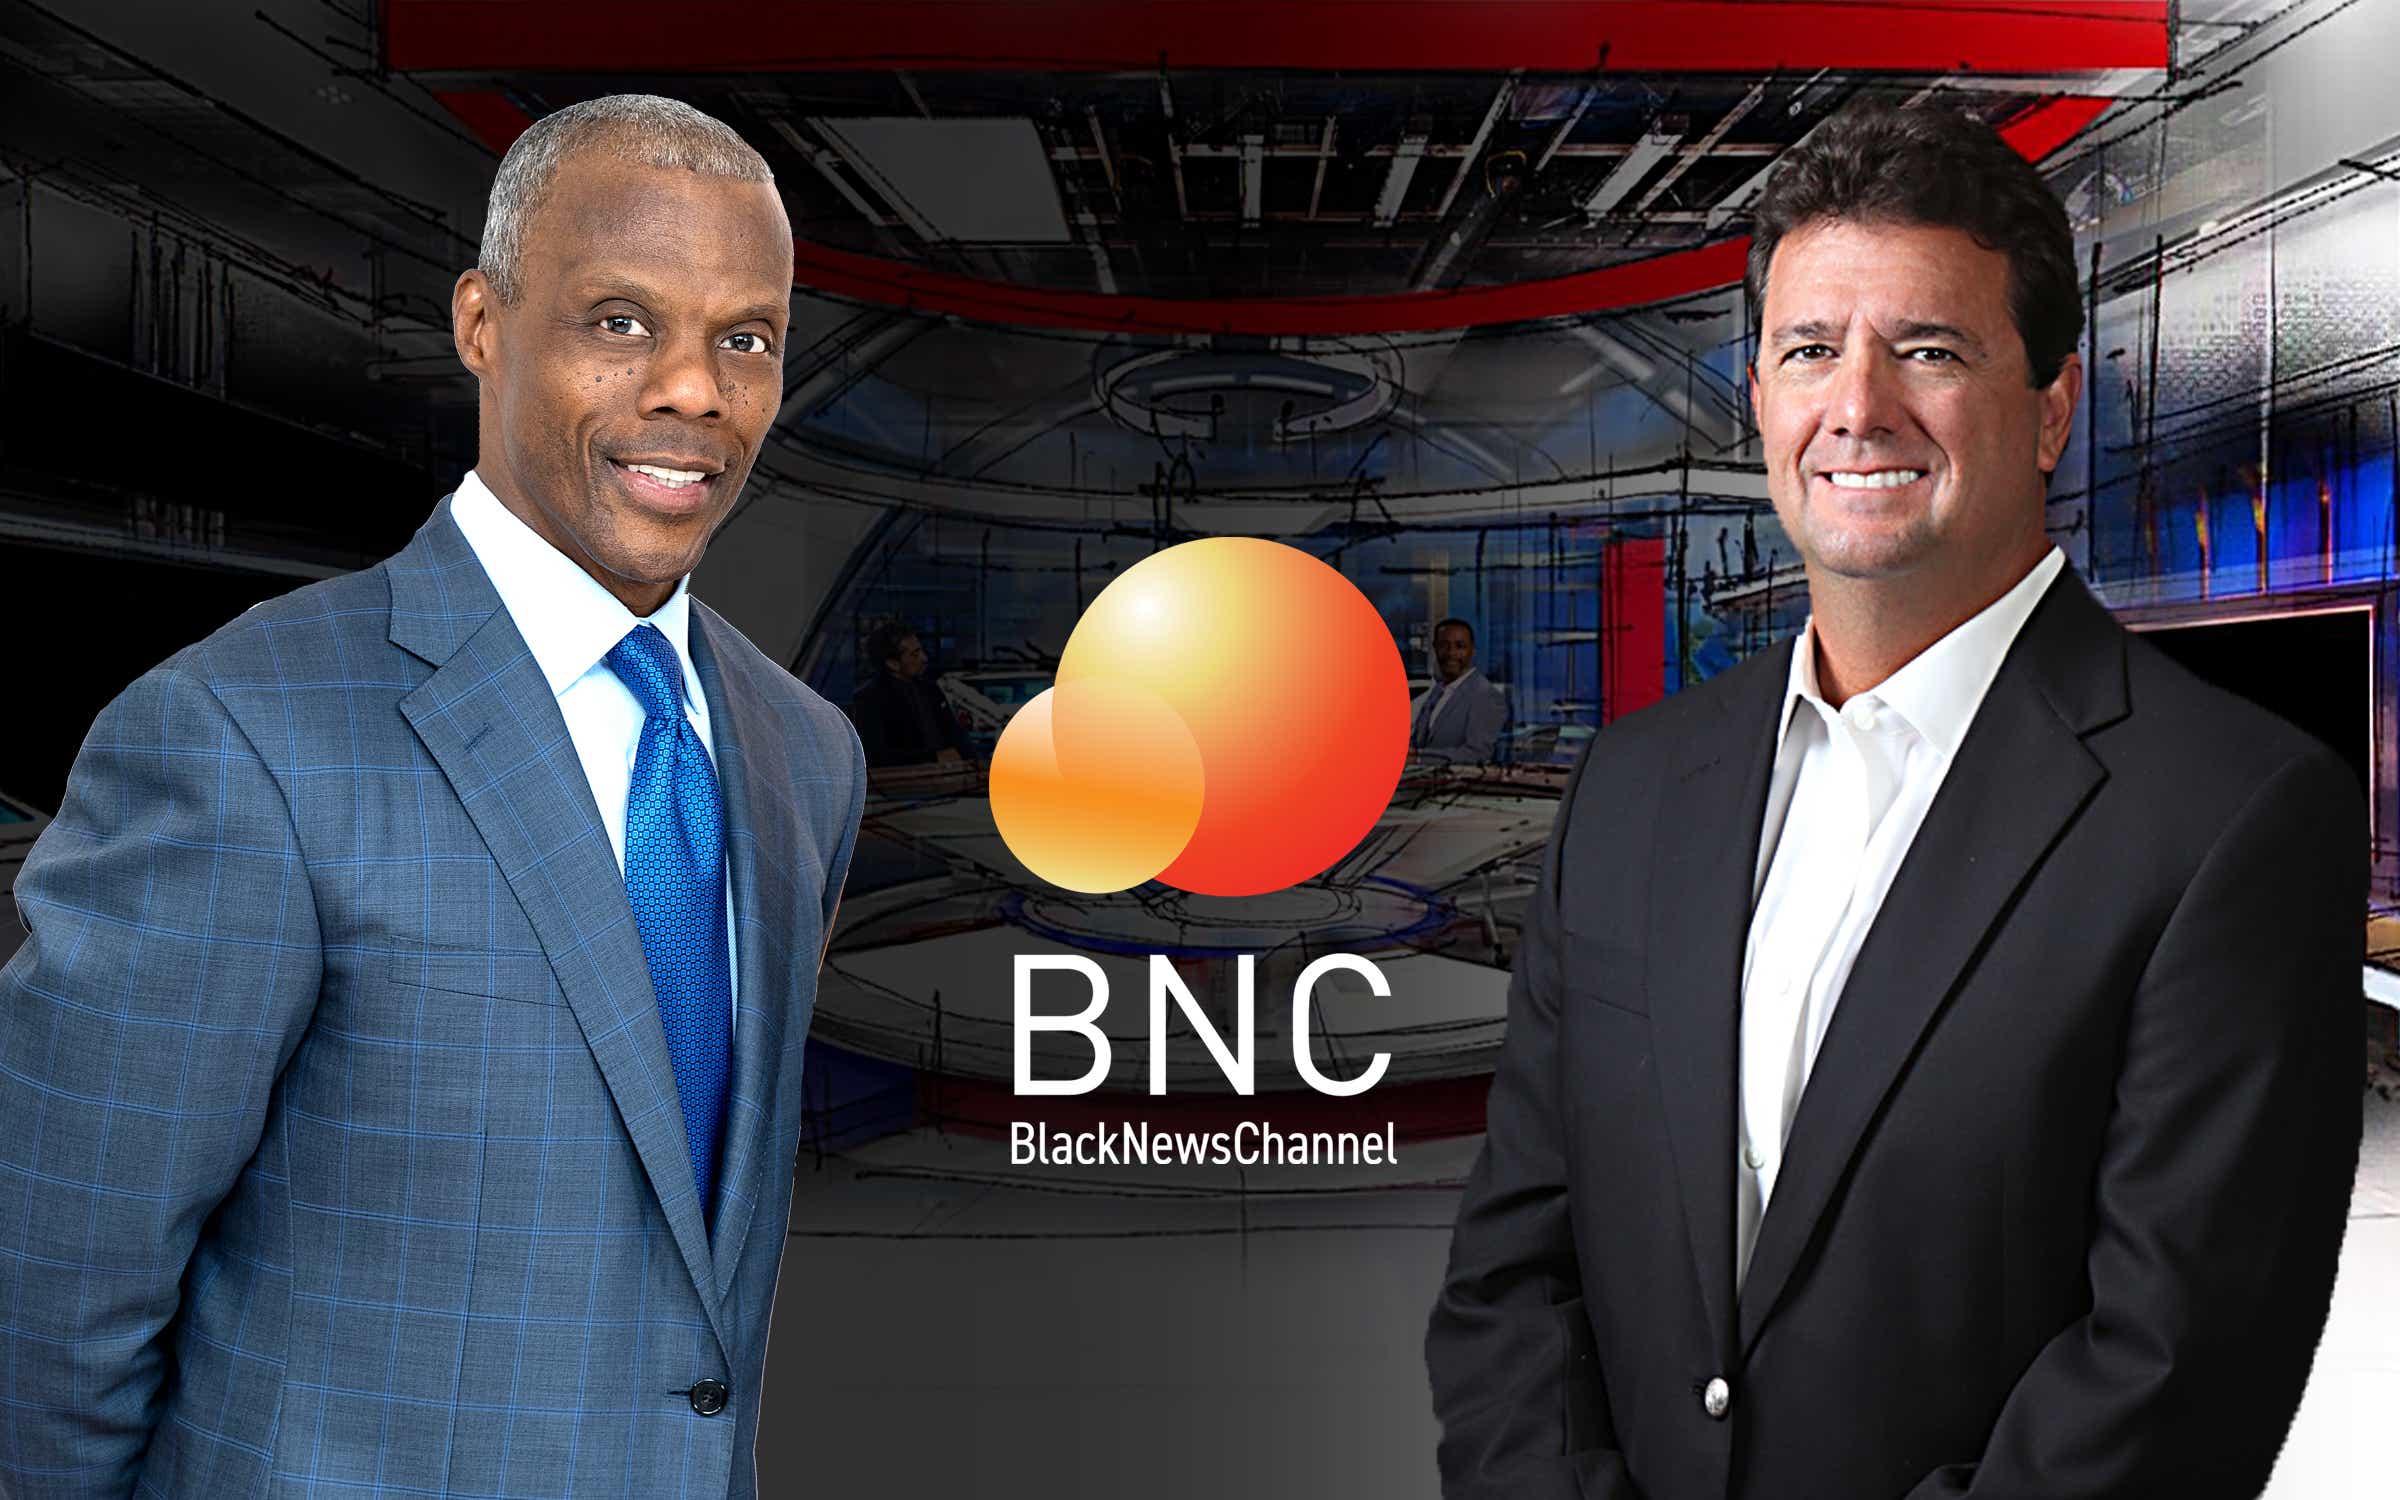 Black News Channel (BNC) to Launch in January 2020